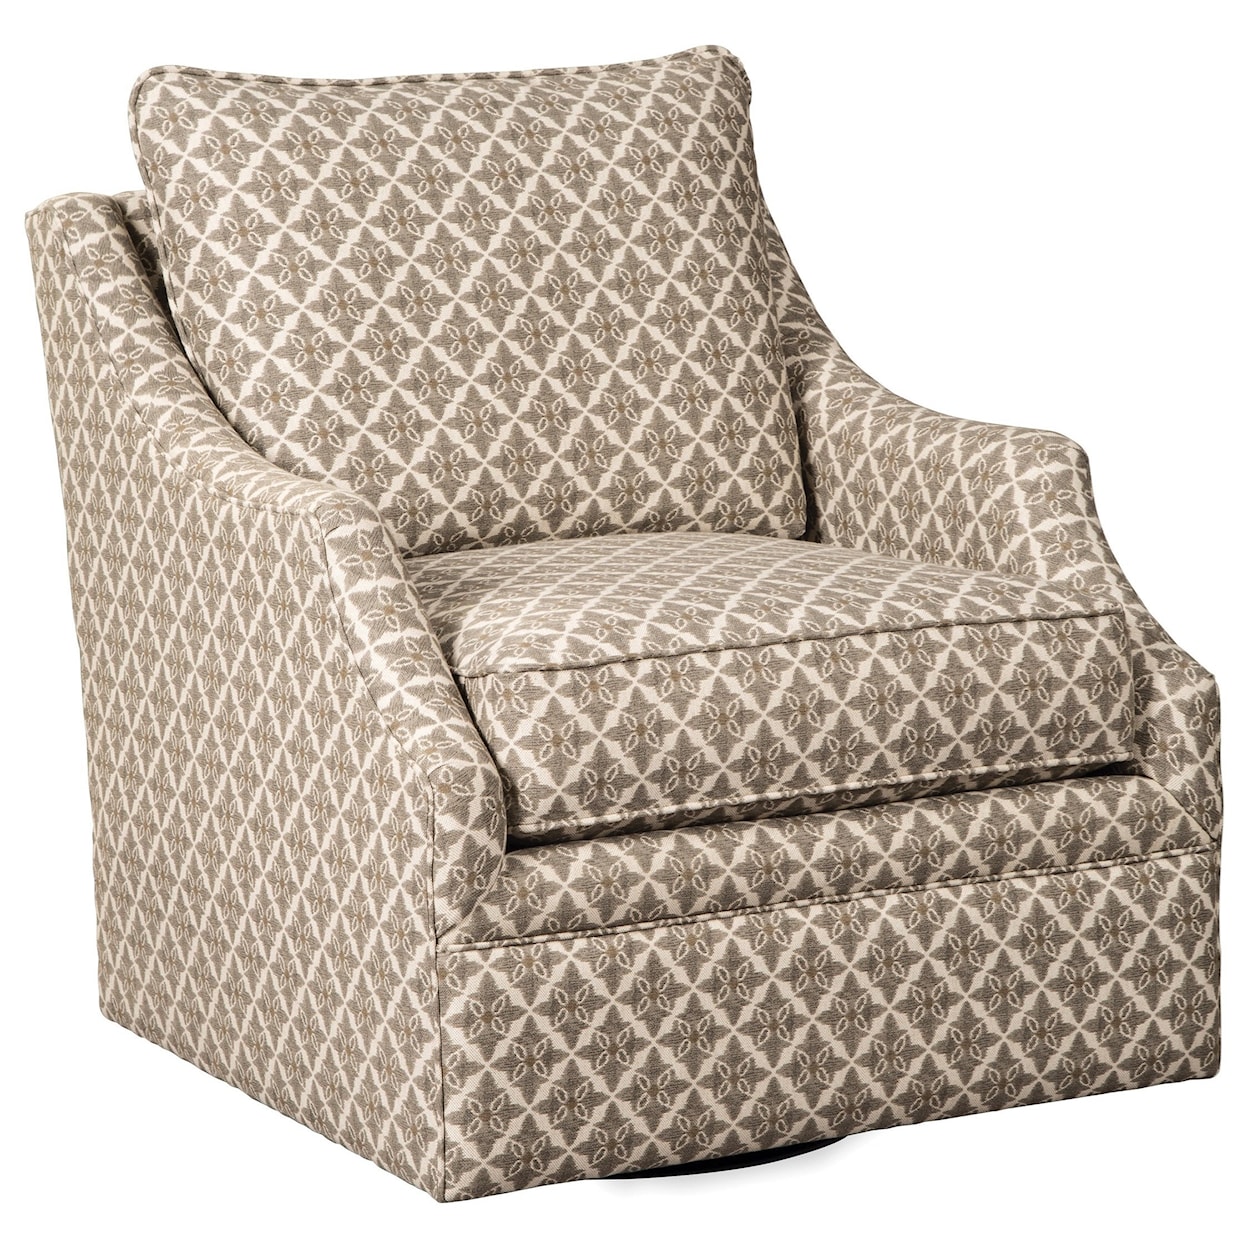 Paula Deen by Craftmaster Upholstered Chairs Glider Chair